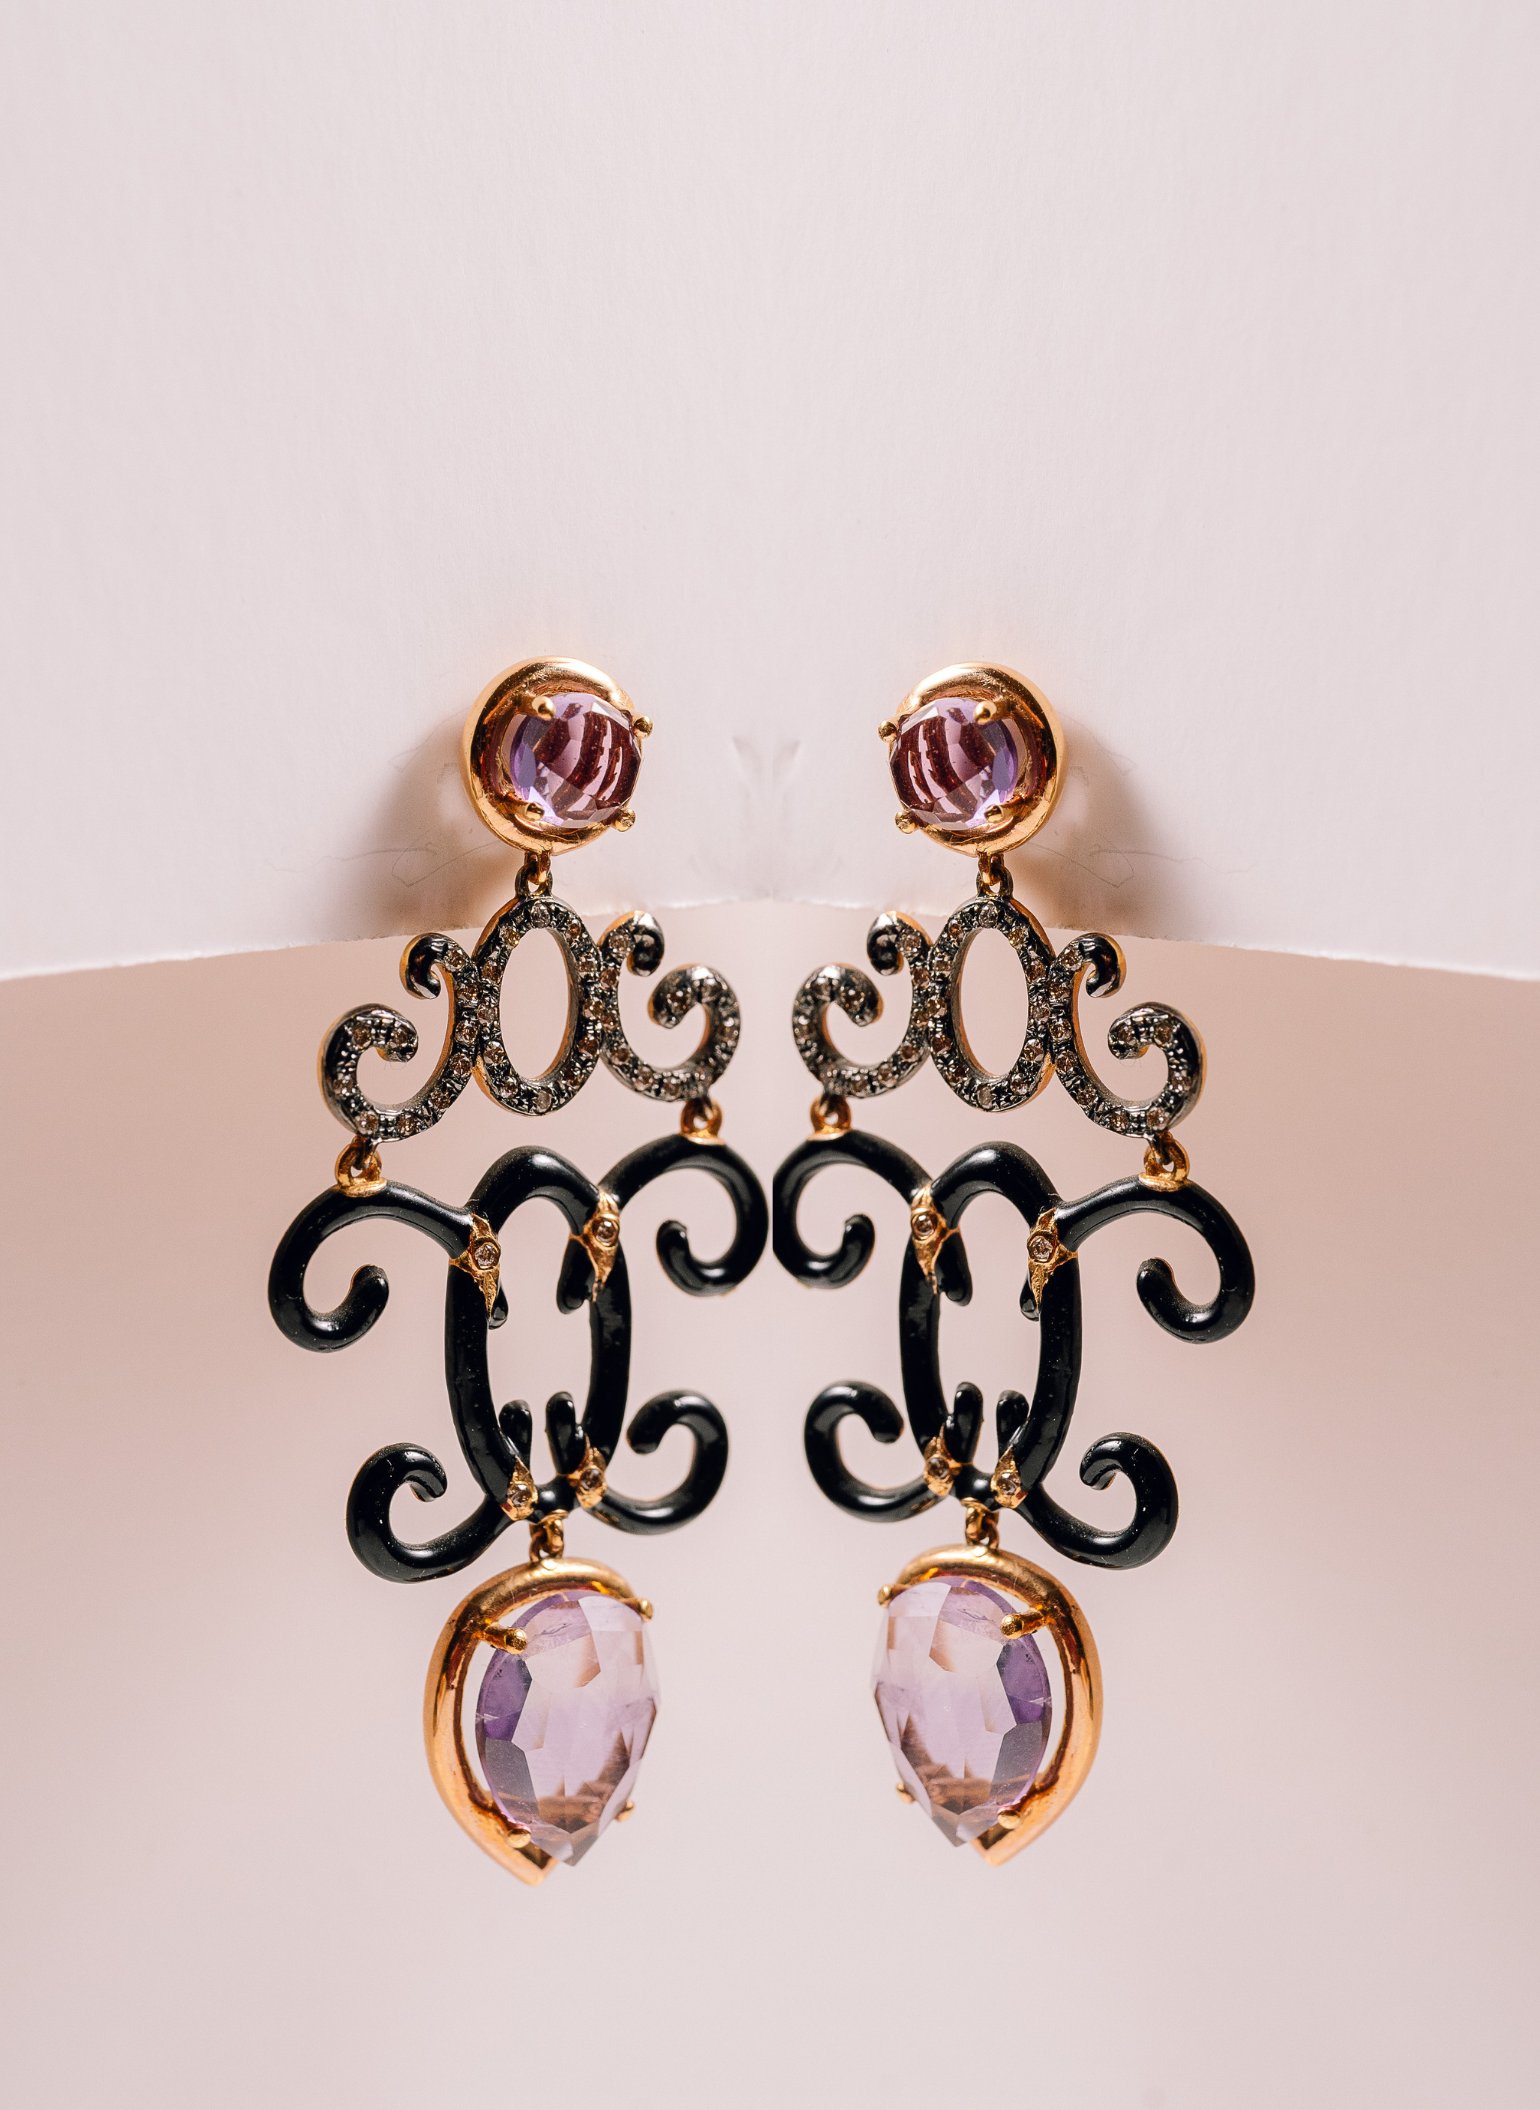 Chandelier Rose Gold and Amethysts Earrings